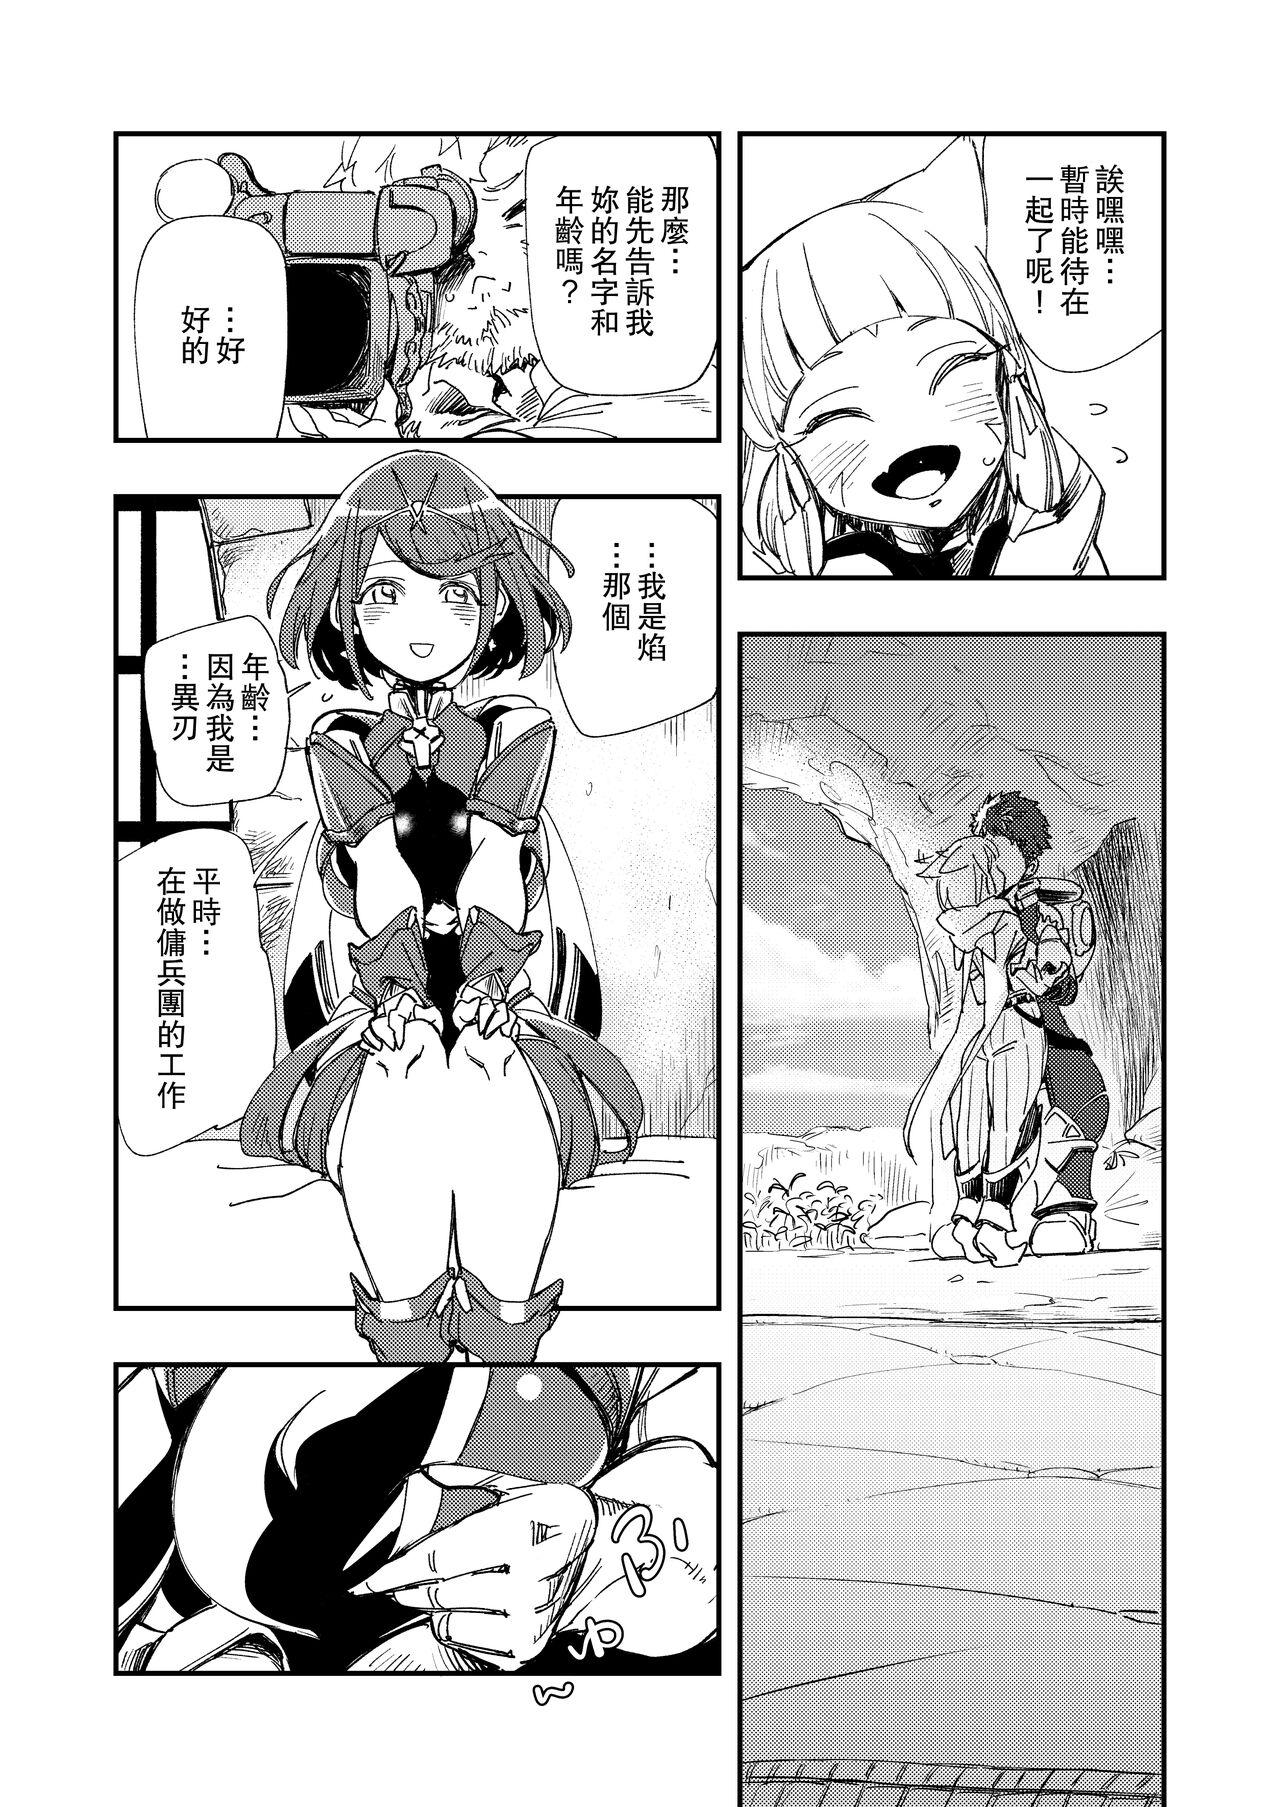 Mexicana NEAREST - Xenoblade chronicles 2 Ass - Page 5